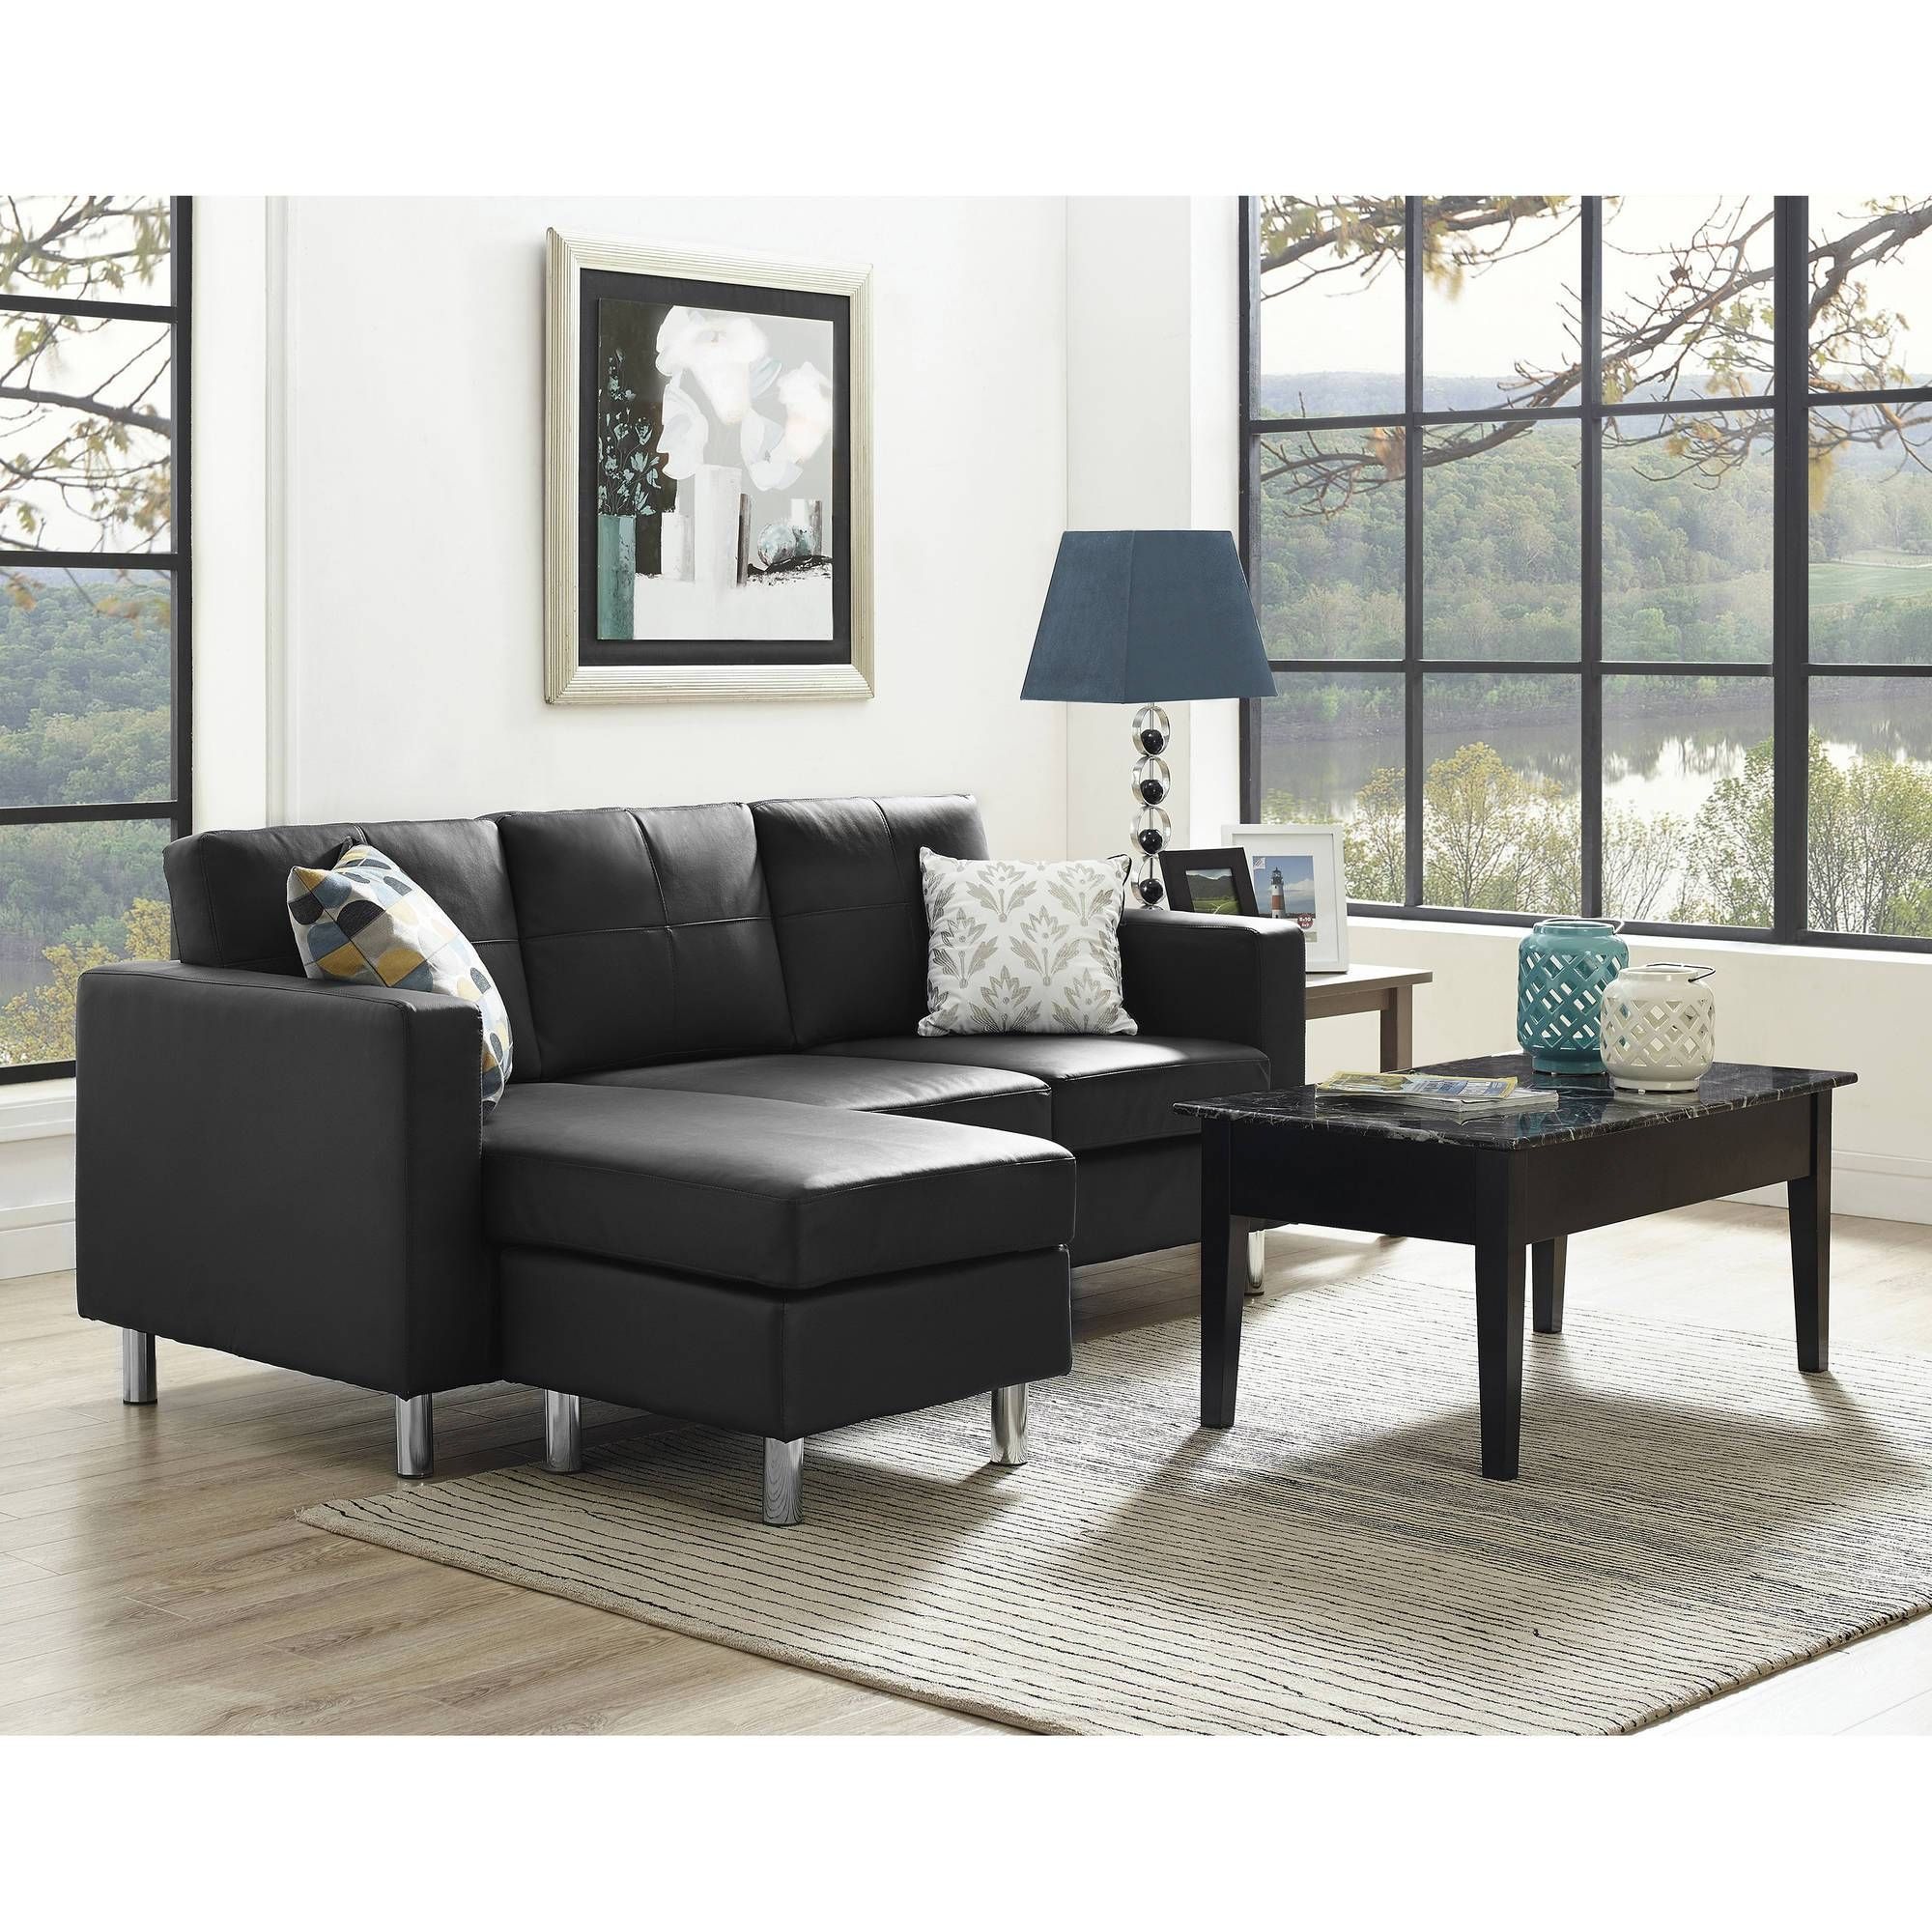 Beautiful Sectional Sofa For Small Space 66 For Cozy Sectional Regarding Cozy Sectional Sofas (View 22 of 30)